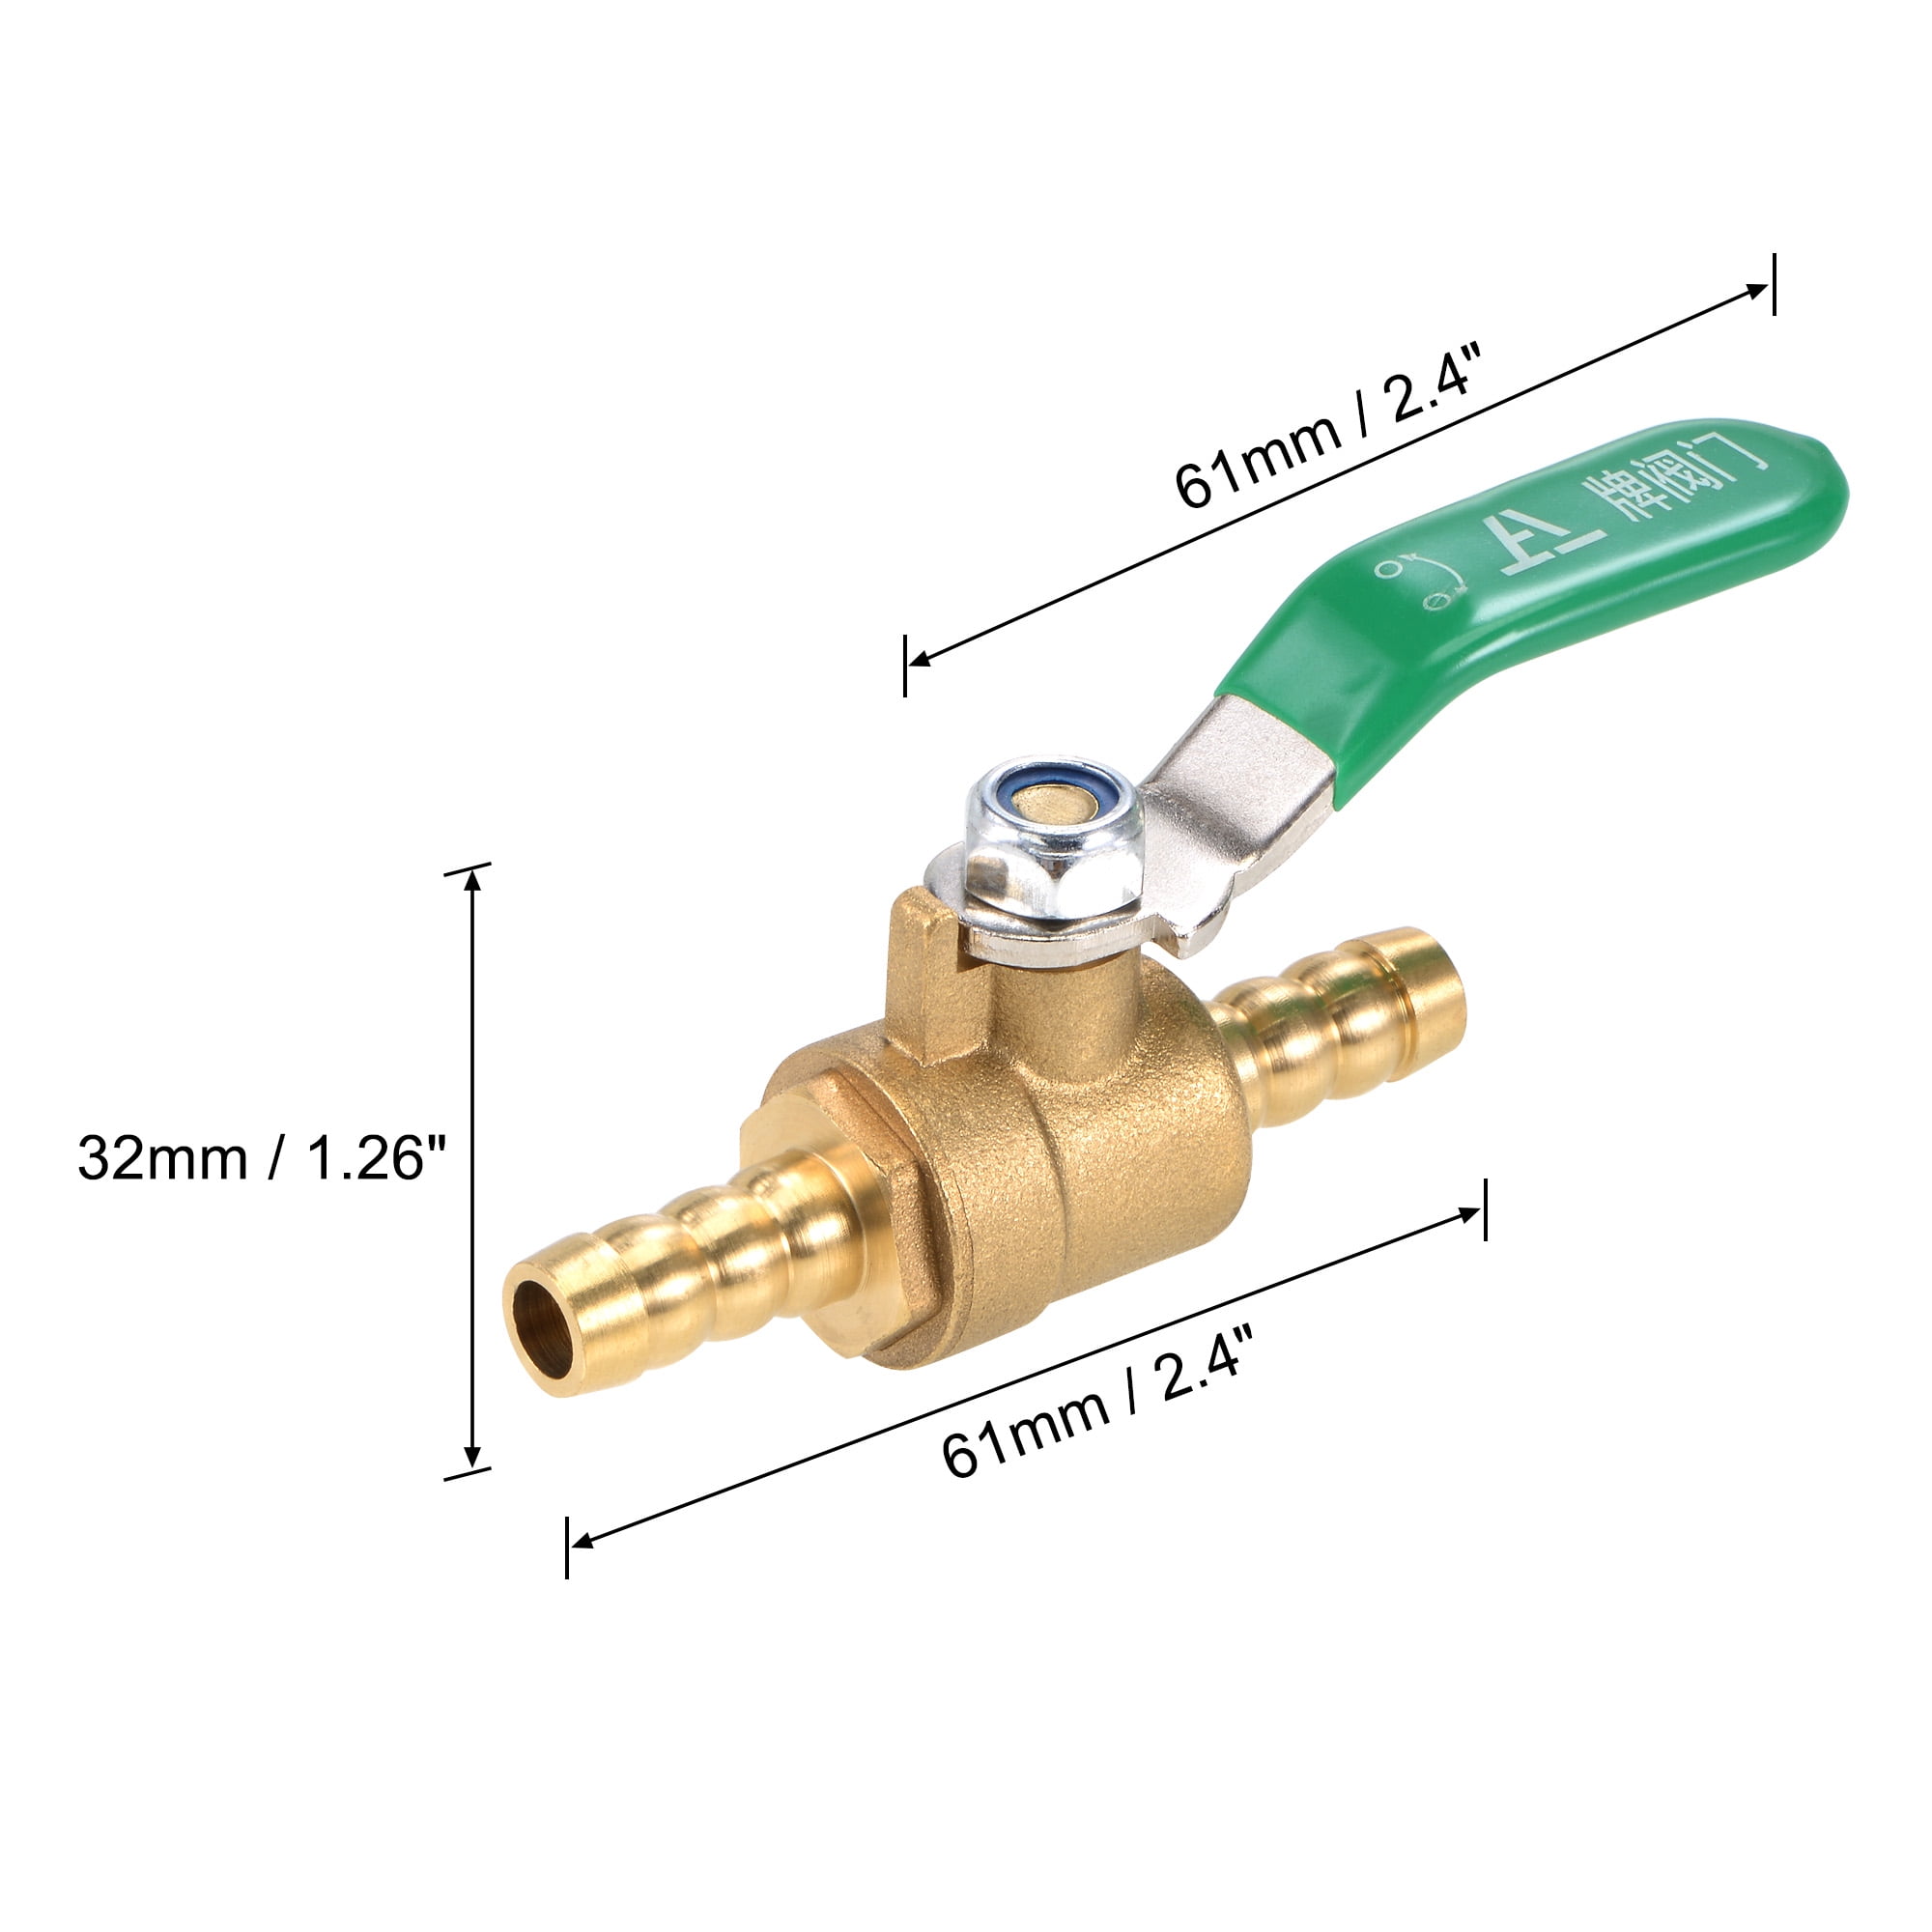 Details about   Air Ball Valve Shut Off Switch 8mm Hose Barb to 8mm Hose Barb Brass Tone 2Pcs